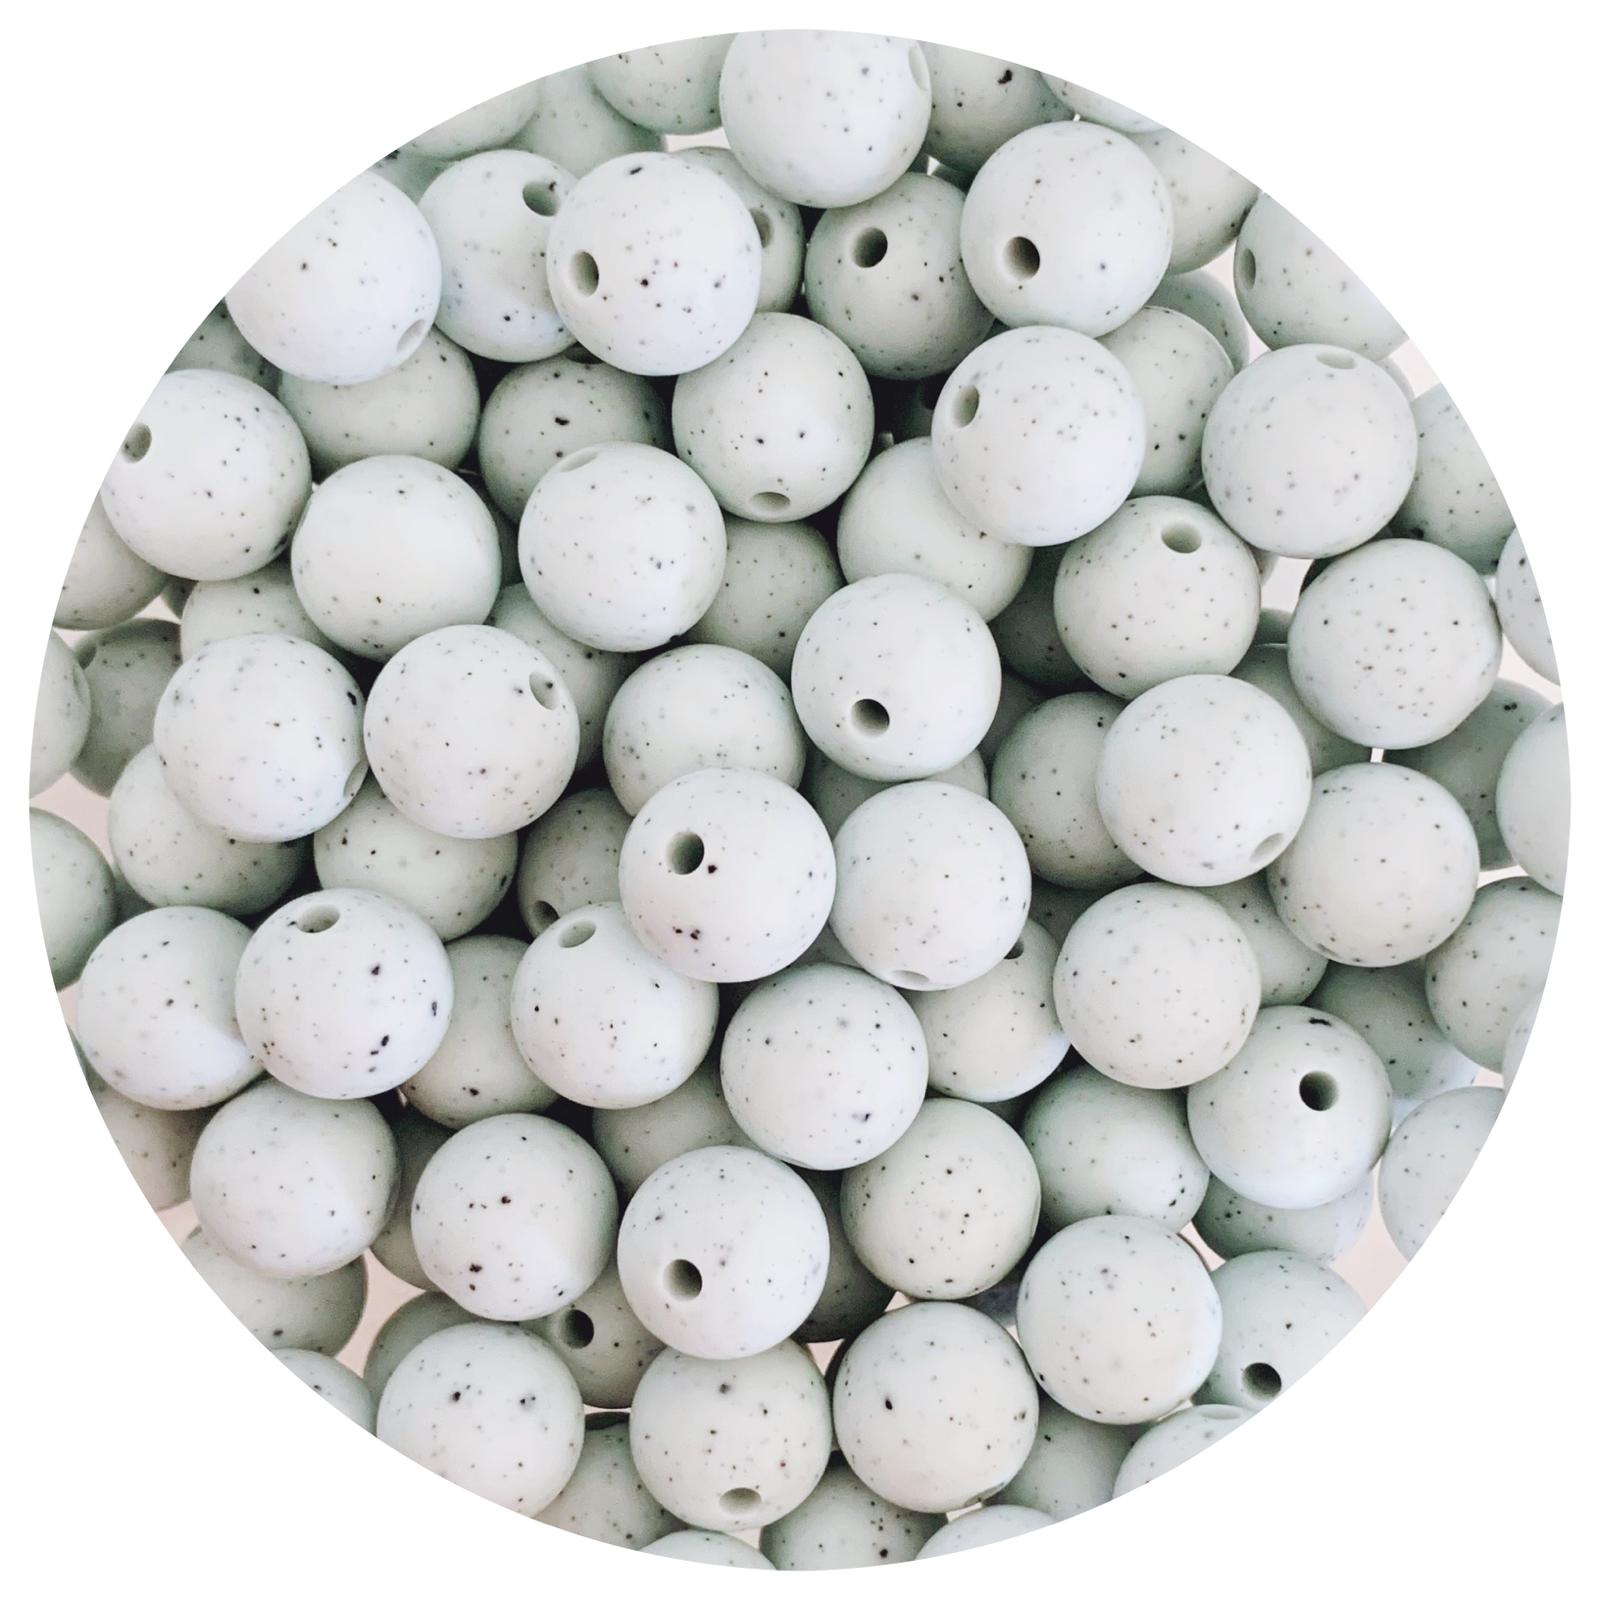 Seabreeze Speckled - 12mm Round Silicone Beads - 10 beads